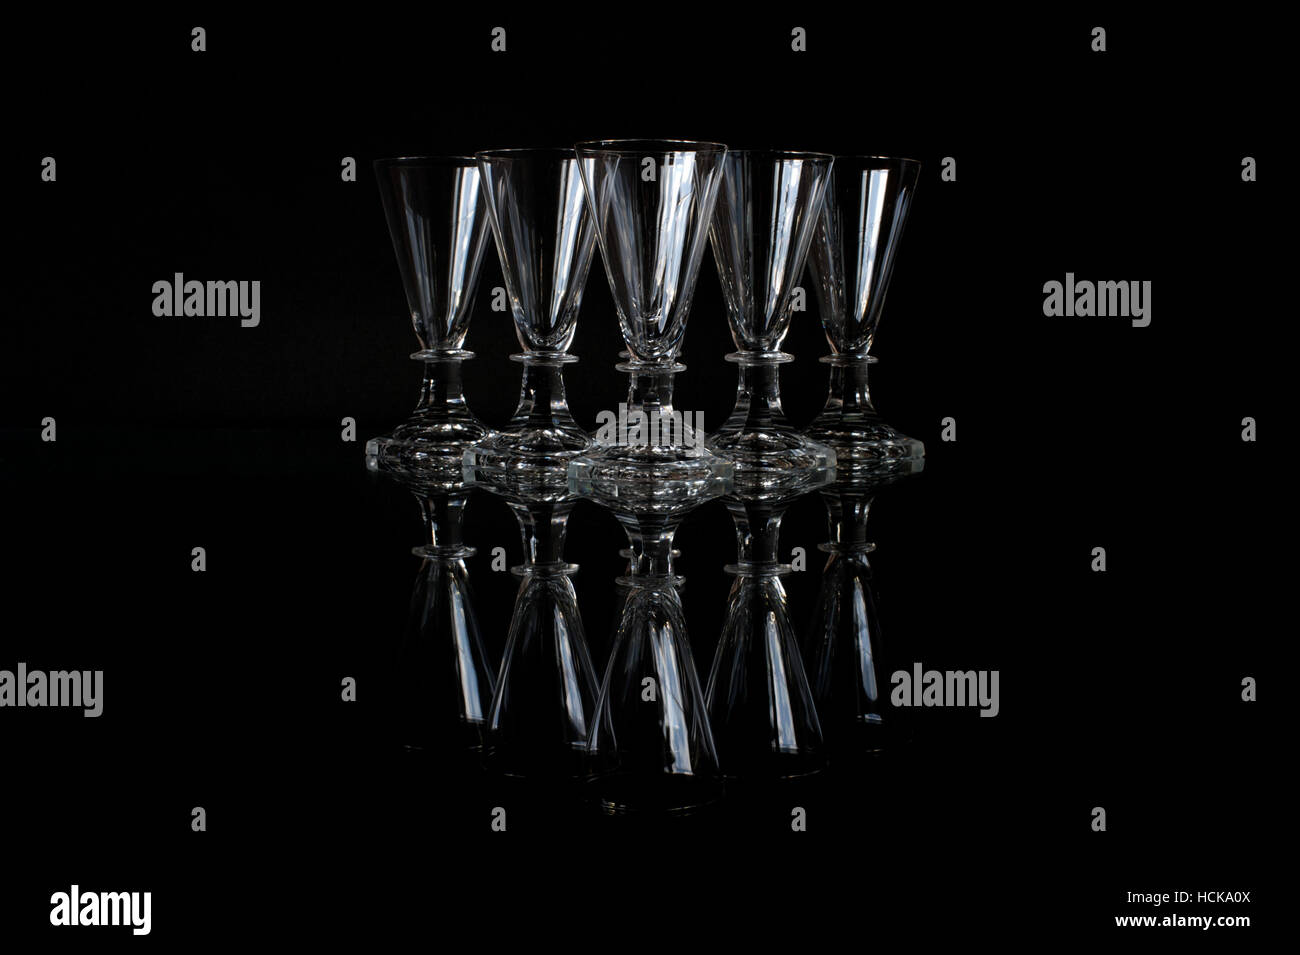 Six beautiful old crystal shot glasses on a glass plate with a black background Stock Photo